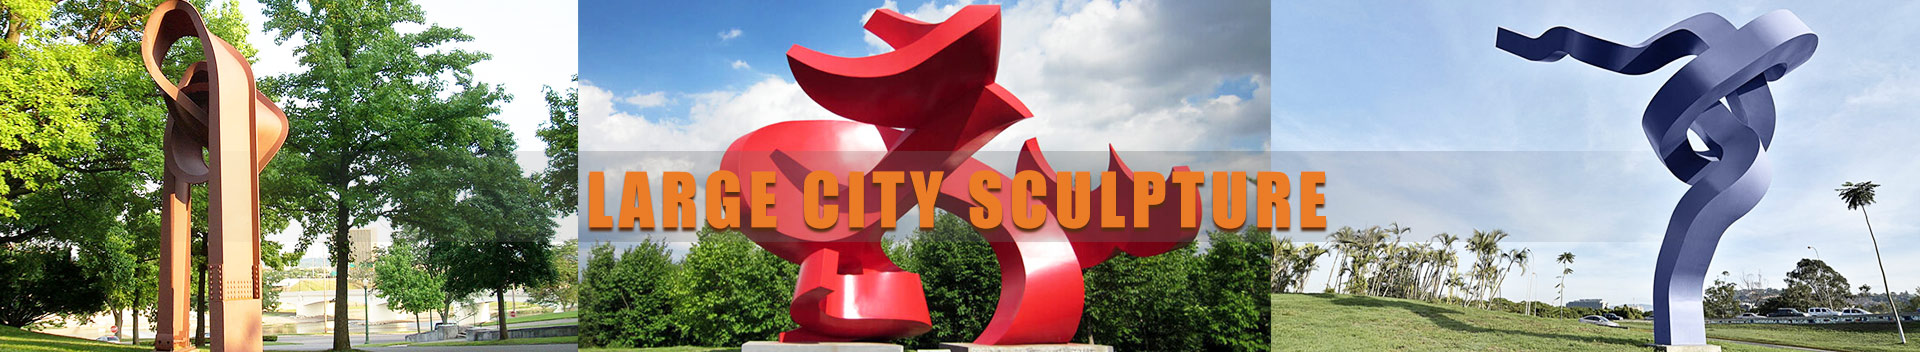 Large City Sculpture Stainless Steel